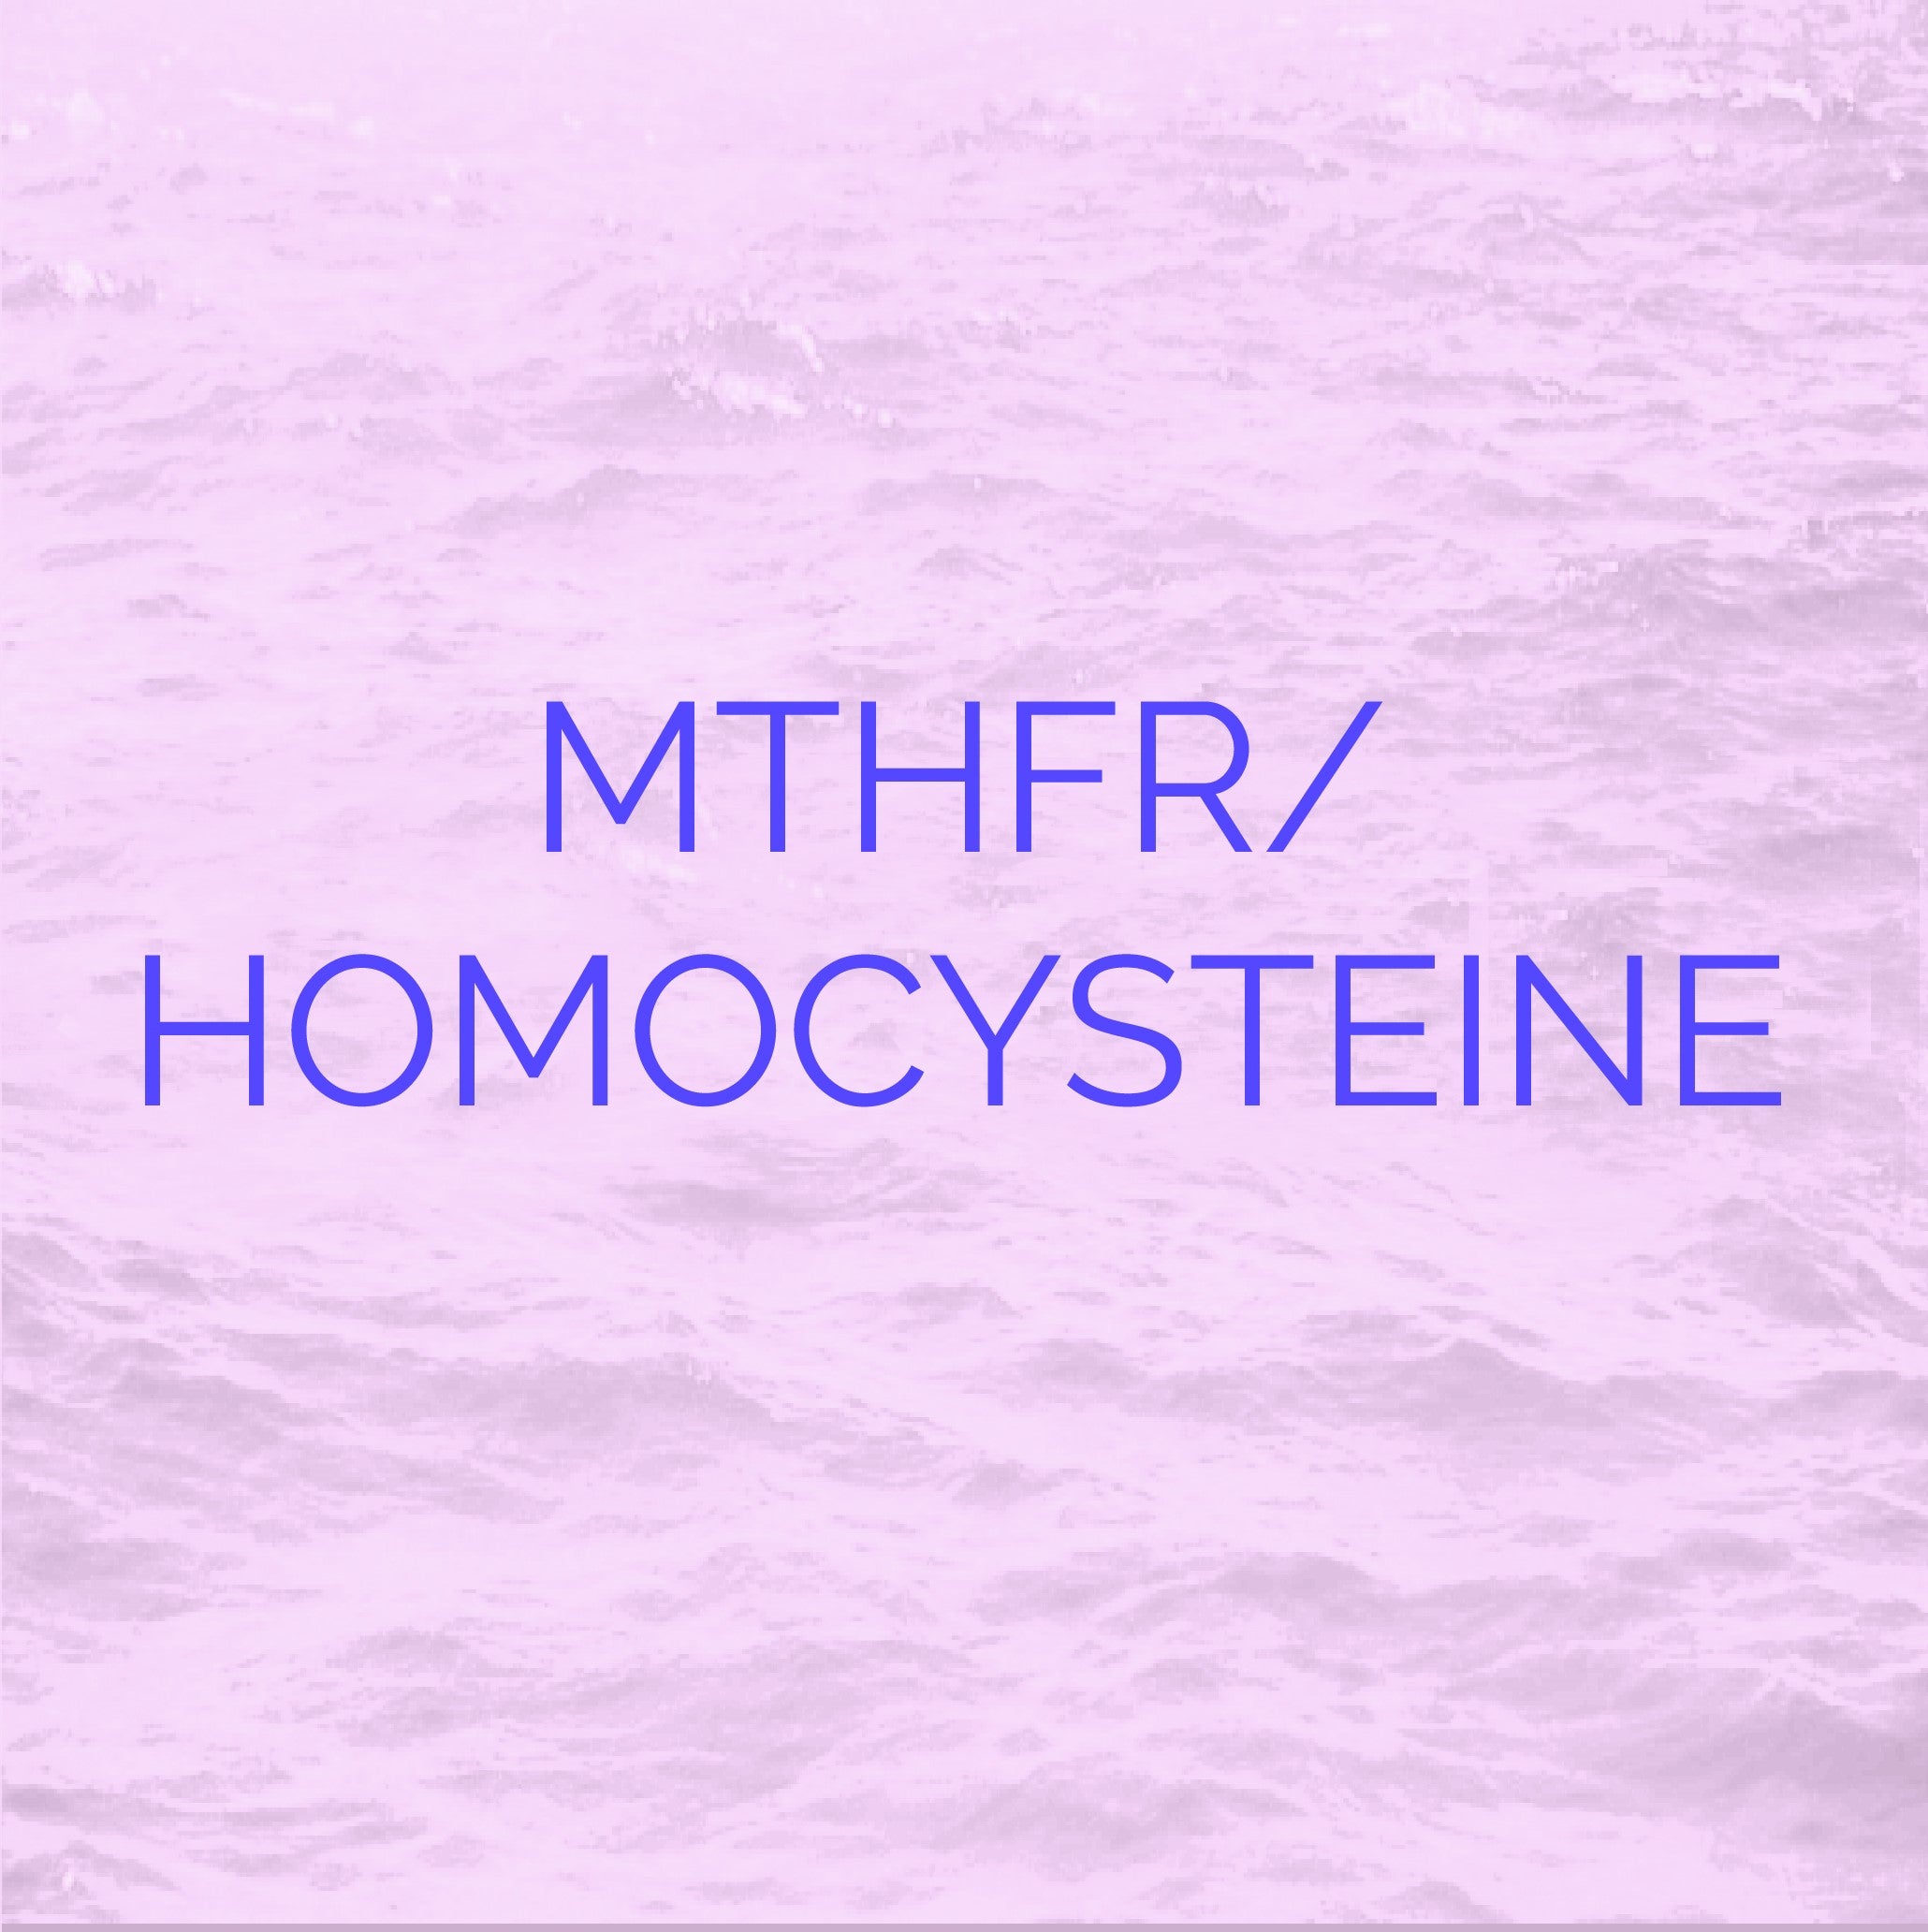 An icon representing MTHFR